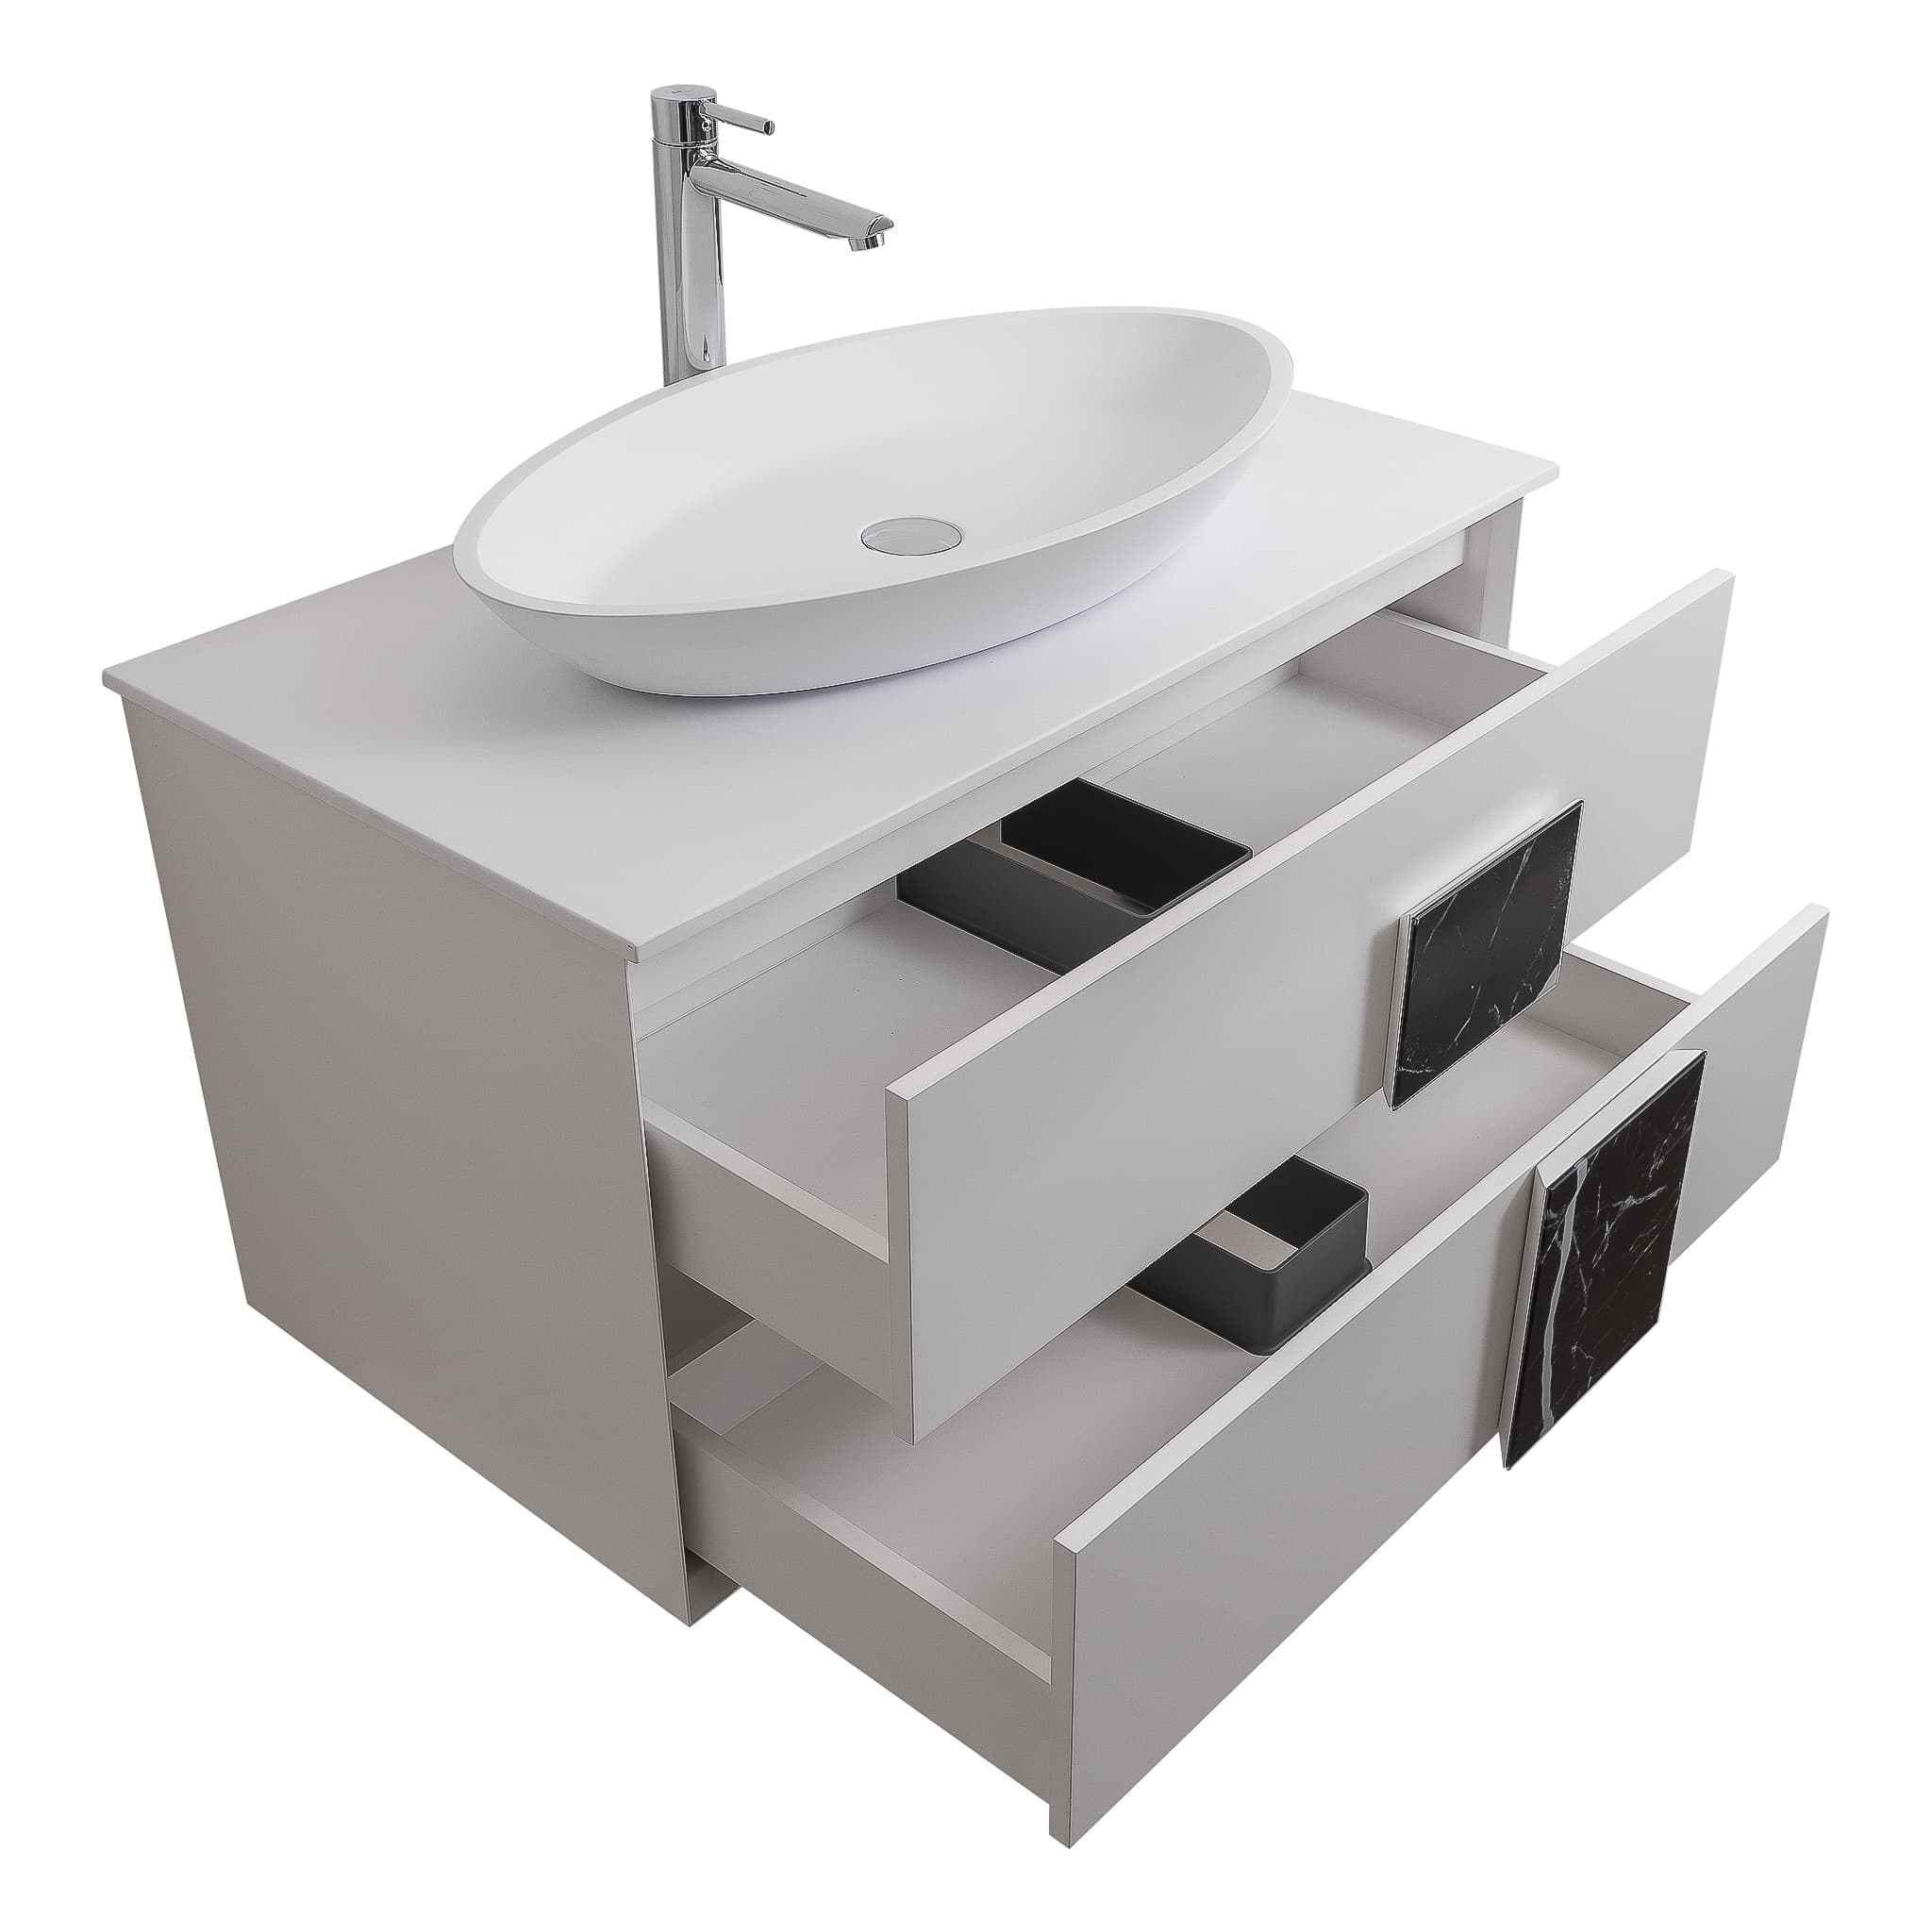 Piazza 31.5 Matte White With Black Marble Handle Cabinet, Solid Surface Flat White Counter and Oval Solid Surface White Basin 1305, Wall Mounted Modern Vanity Set